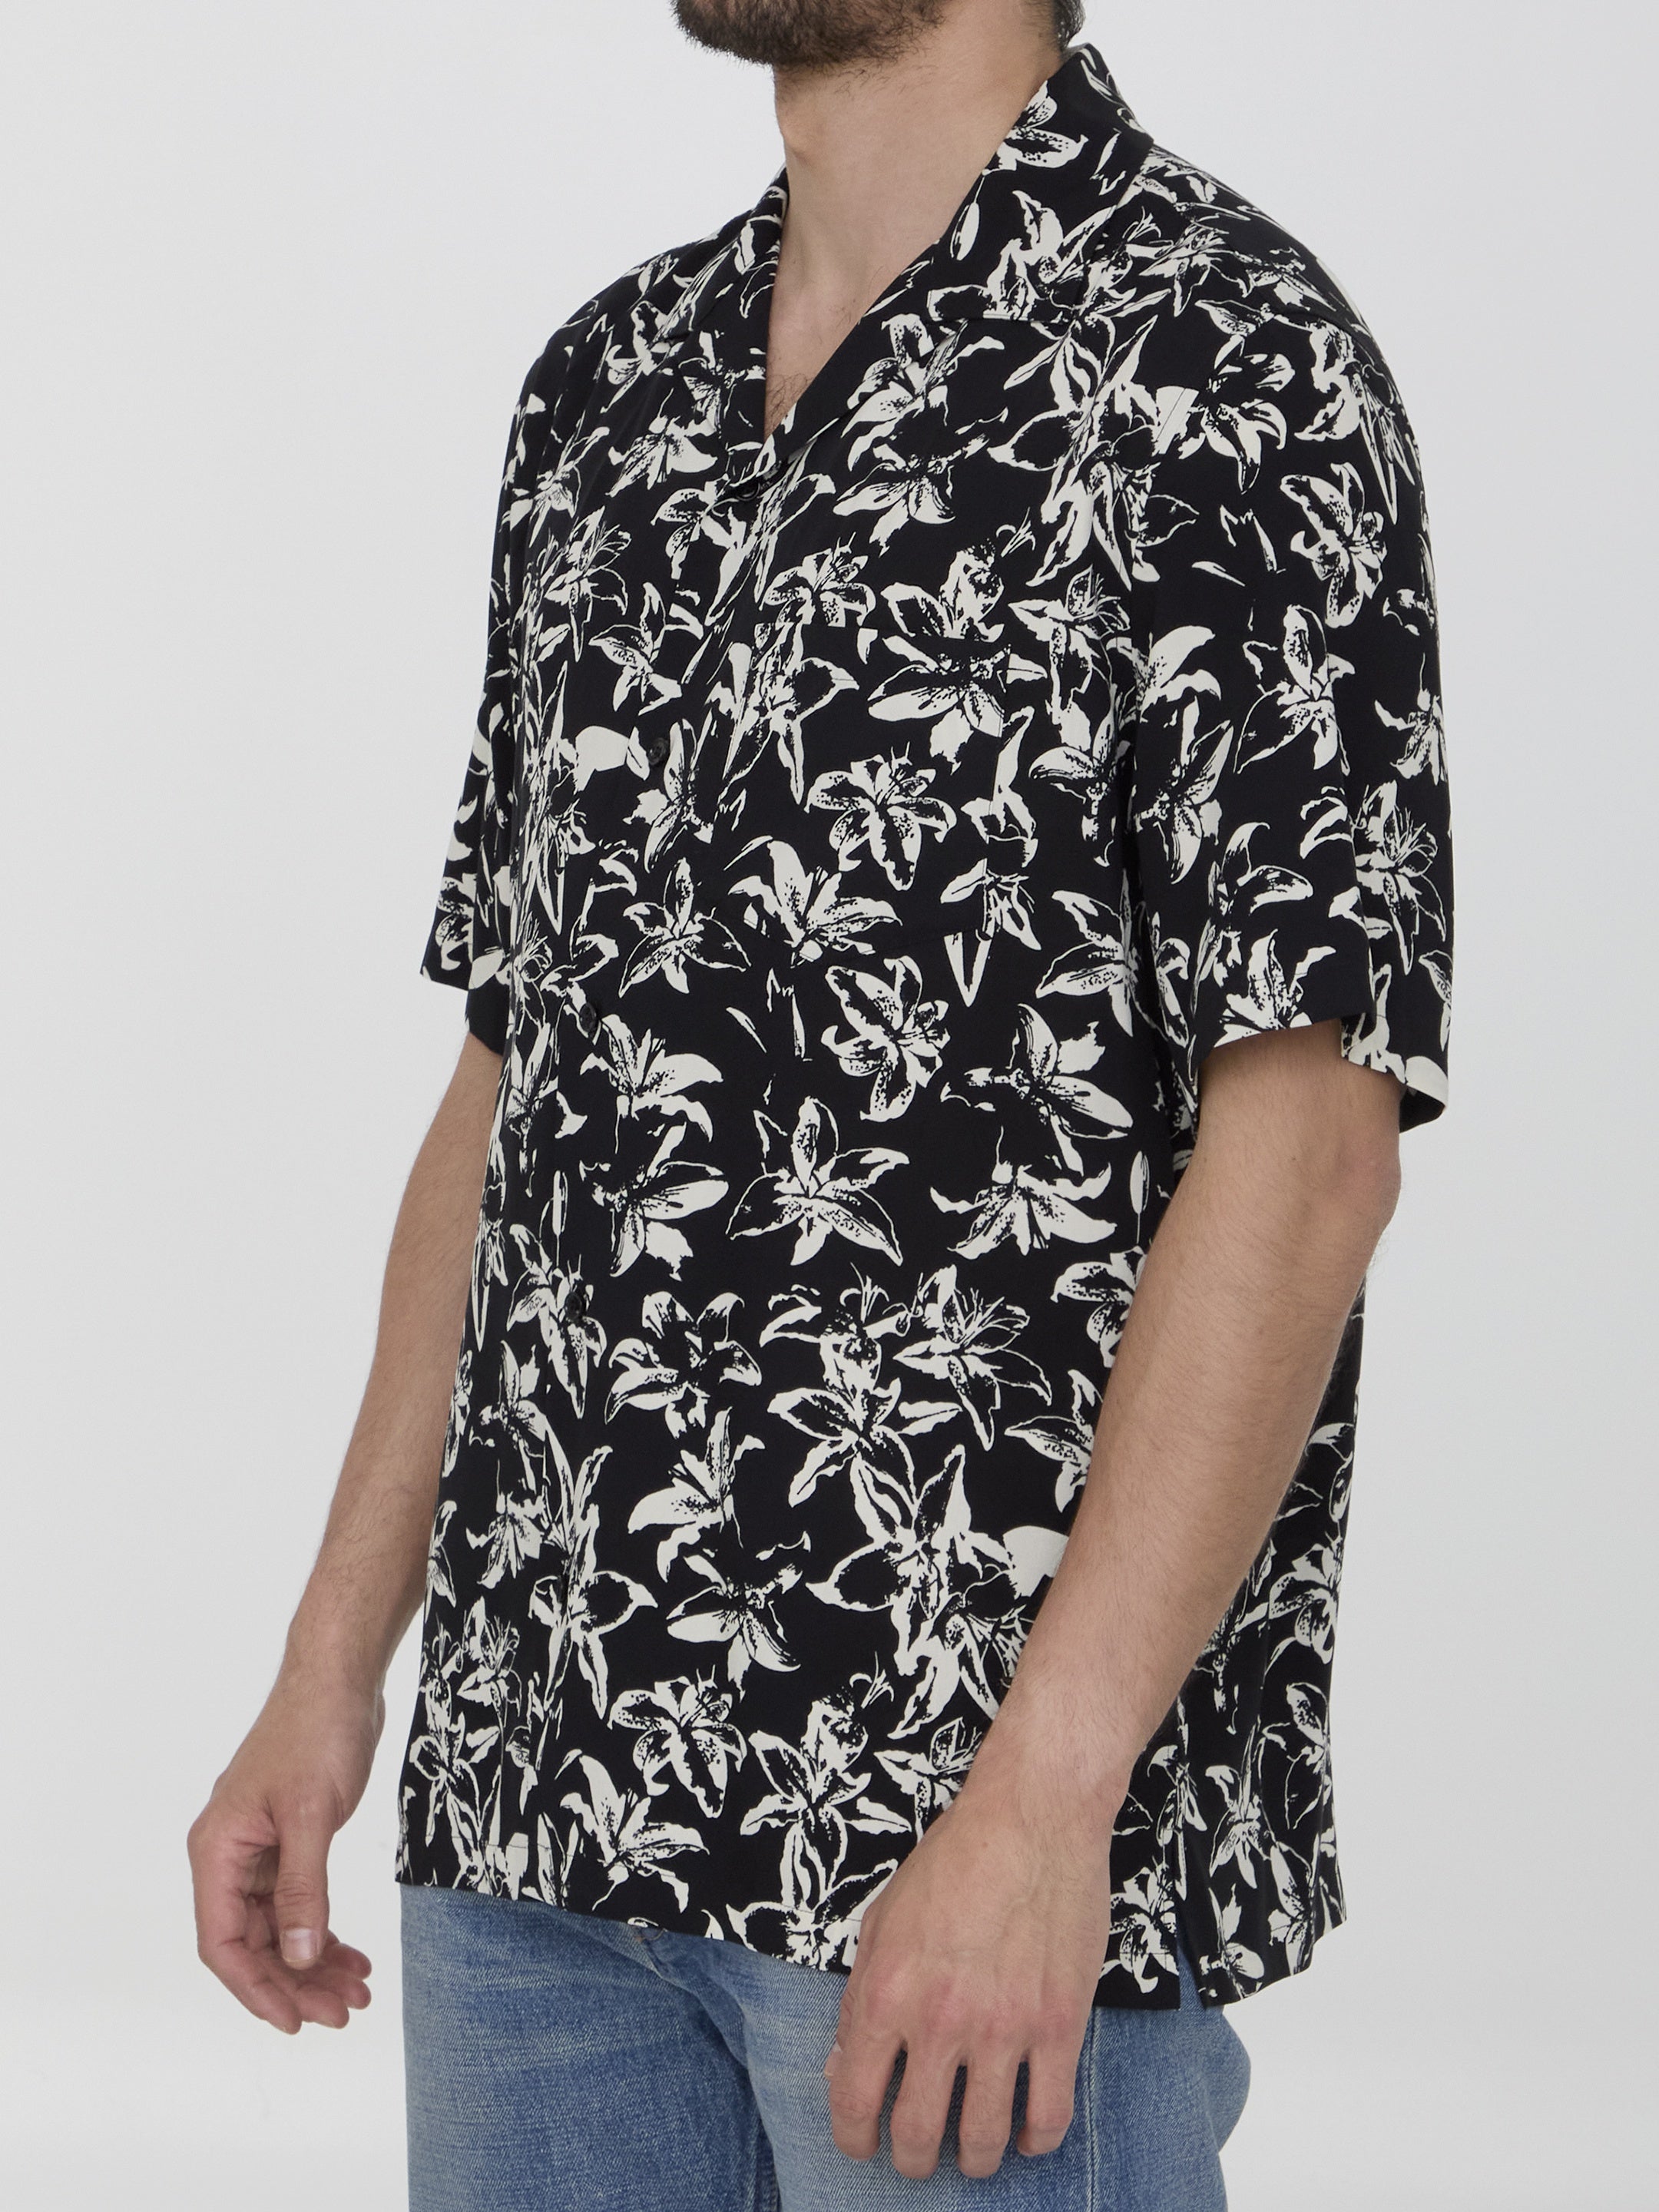 CELINE-OUTLET-SALE-Hawaiian-shirt-Shirts-ARCHIVE-COLLECTION-2.jpg